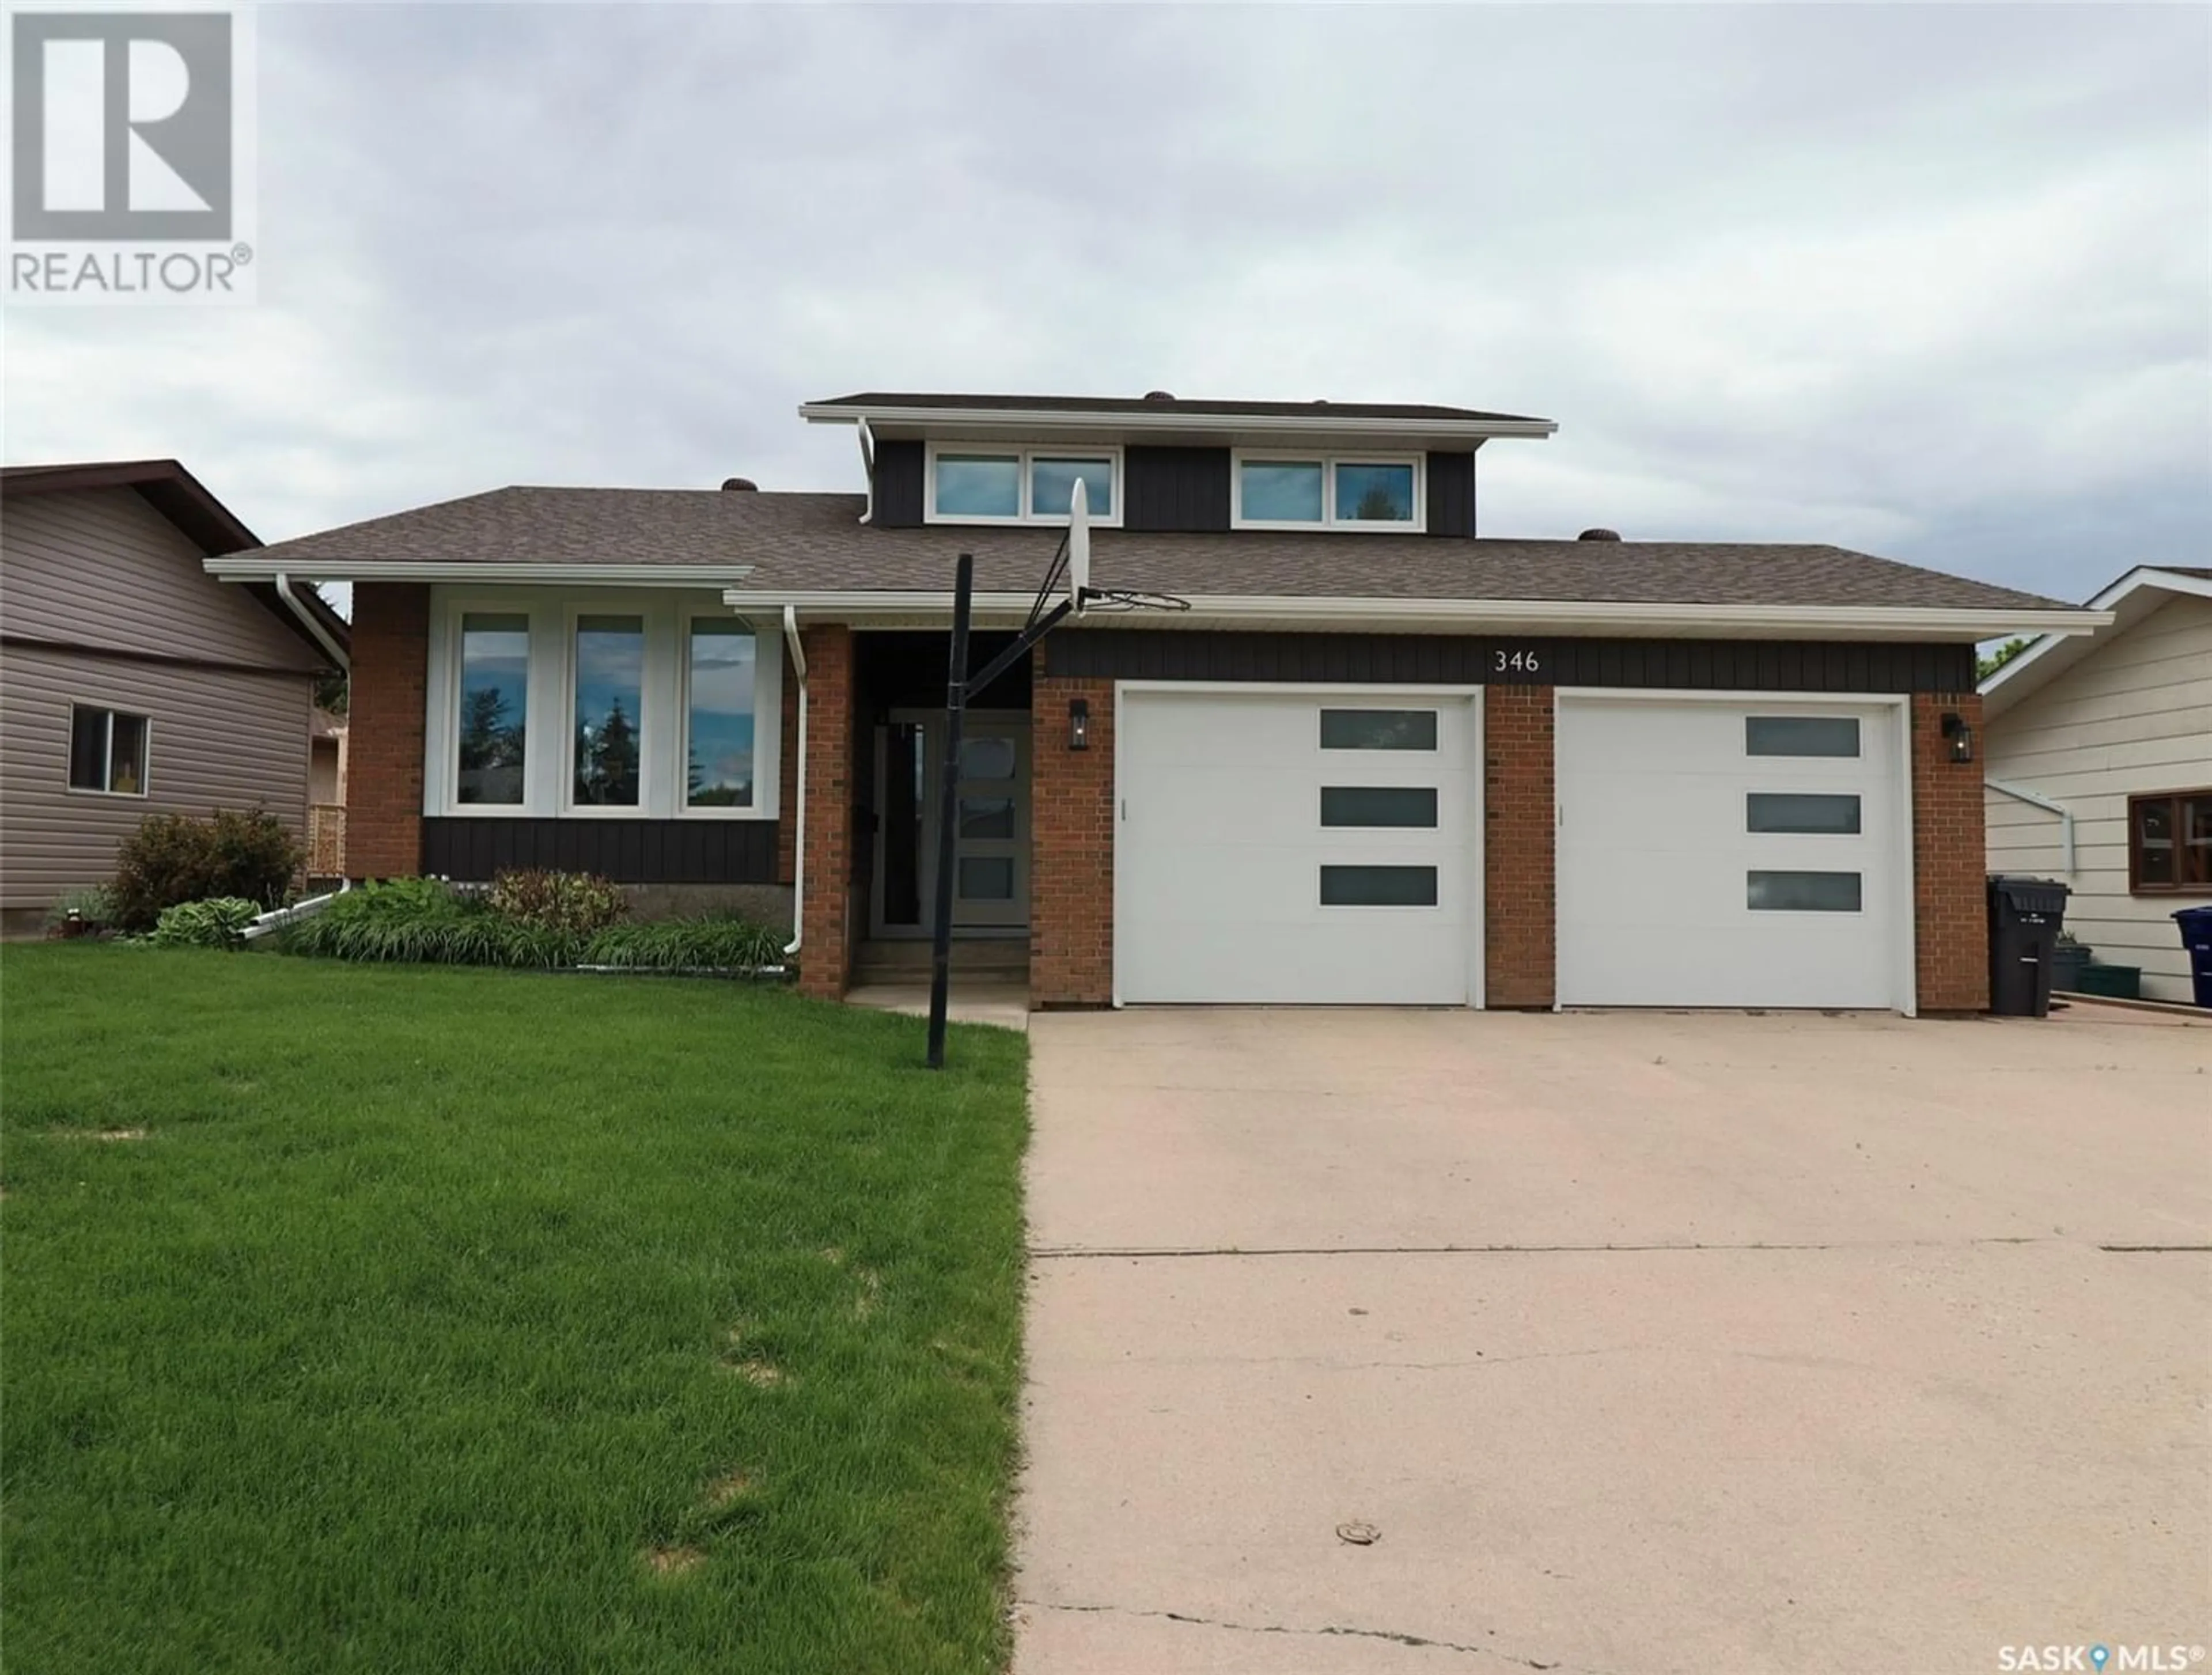 Home with brick exterior material for 346 Walsh TRAIL, Swift Current Saskatchewan S9H4V4